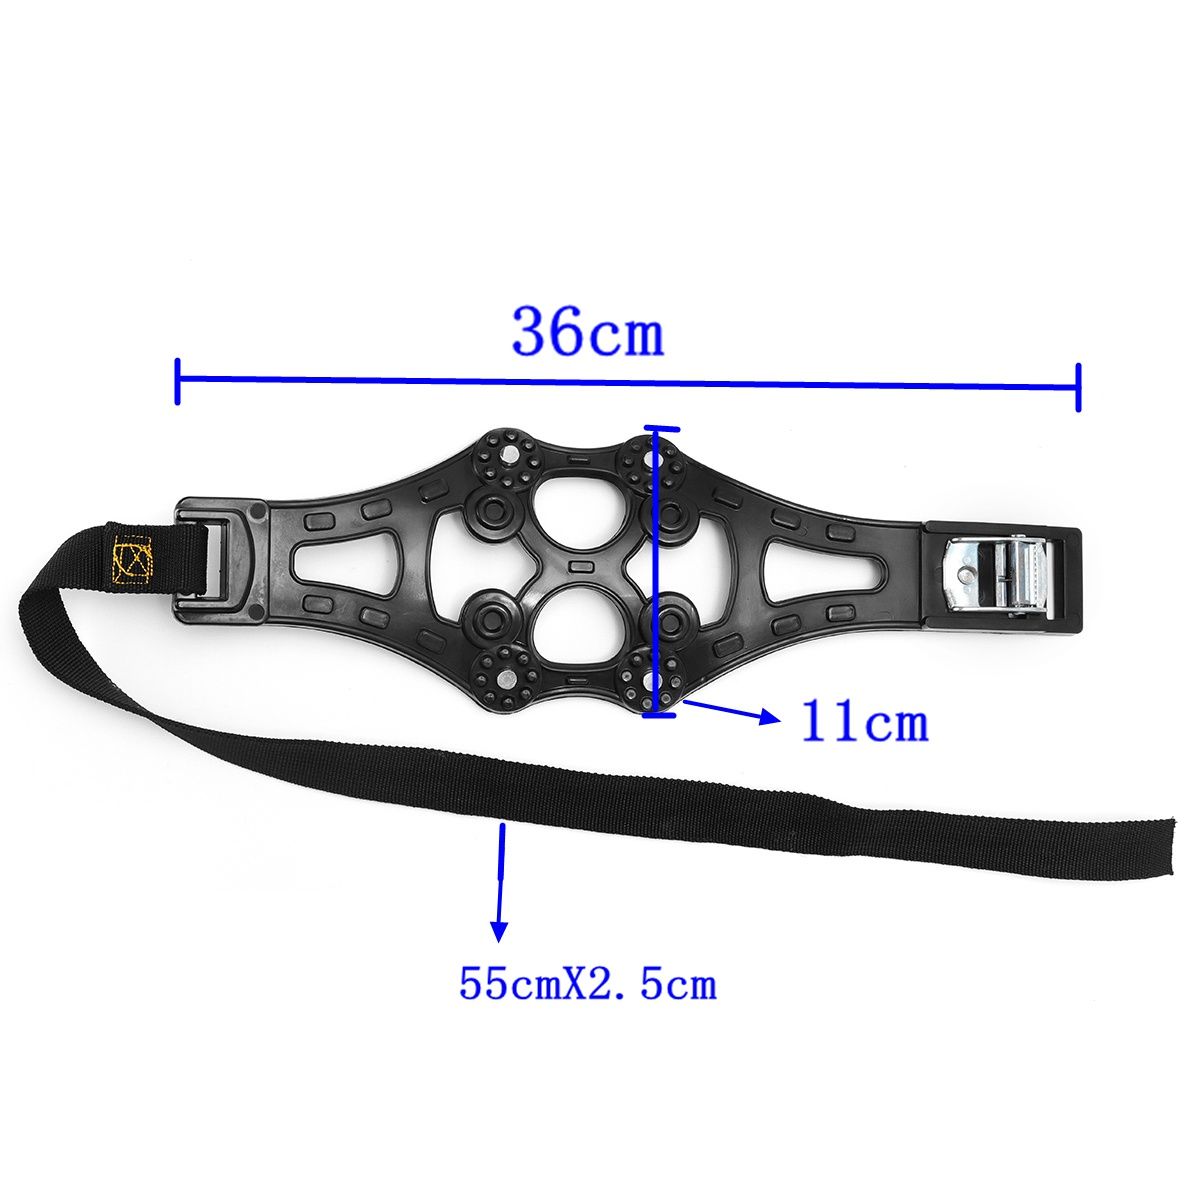 Universal-TPU-Winter-Car-Snow-Chain-Tyre-Wheel-Anti-skid-Safety-Belt-Safe-Driving-For-Ice-Sand-Muddy-1341478